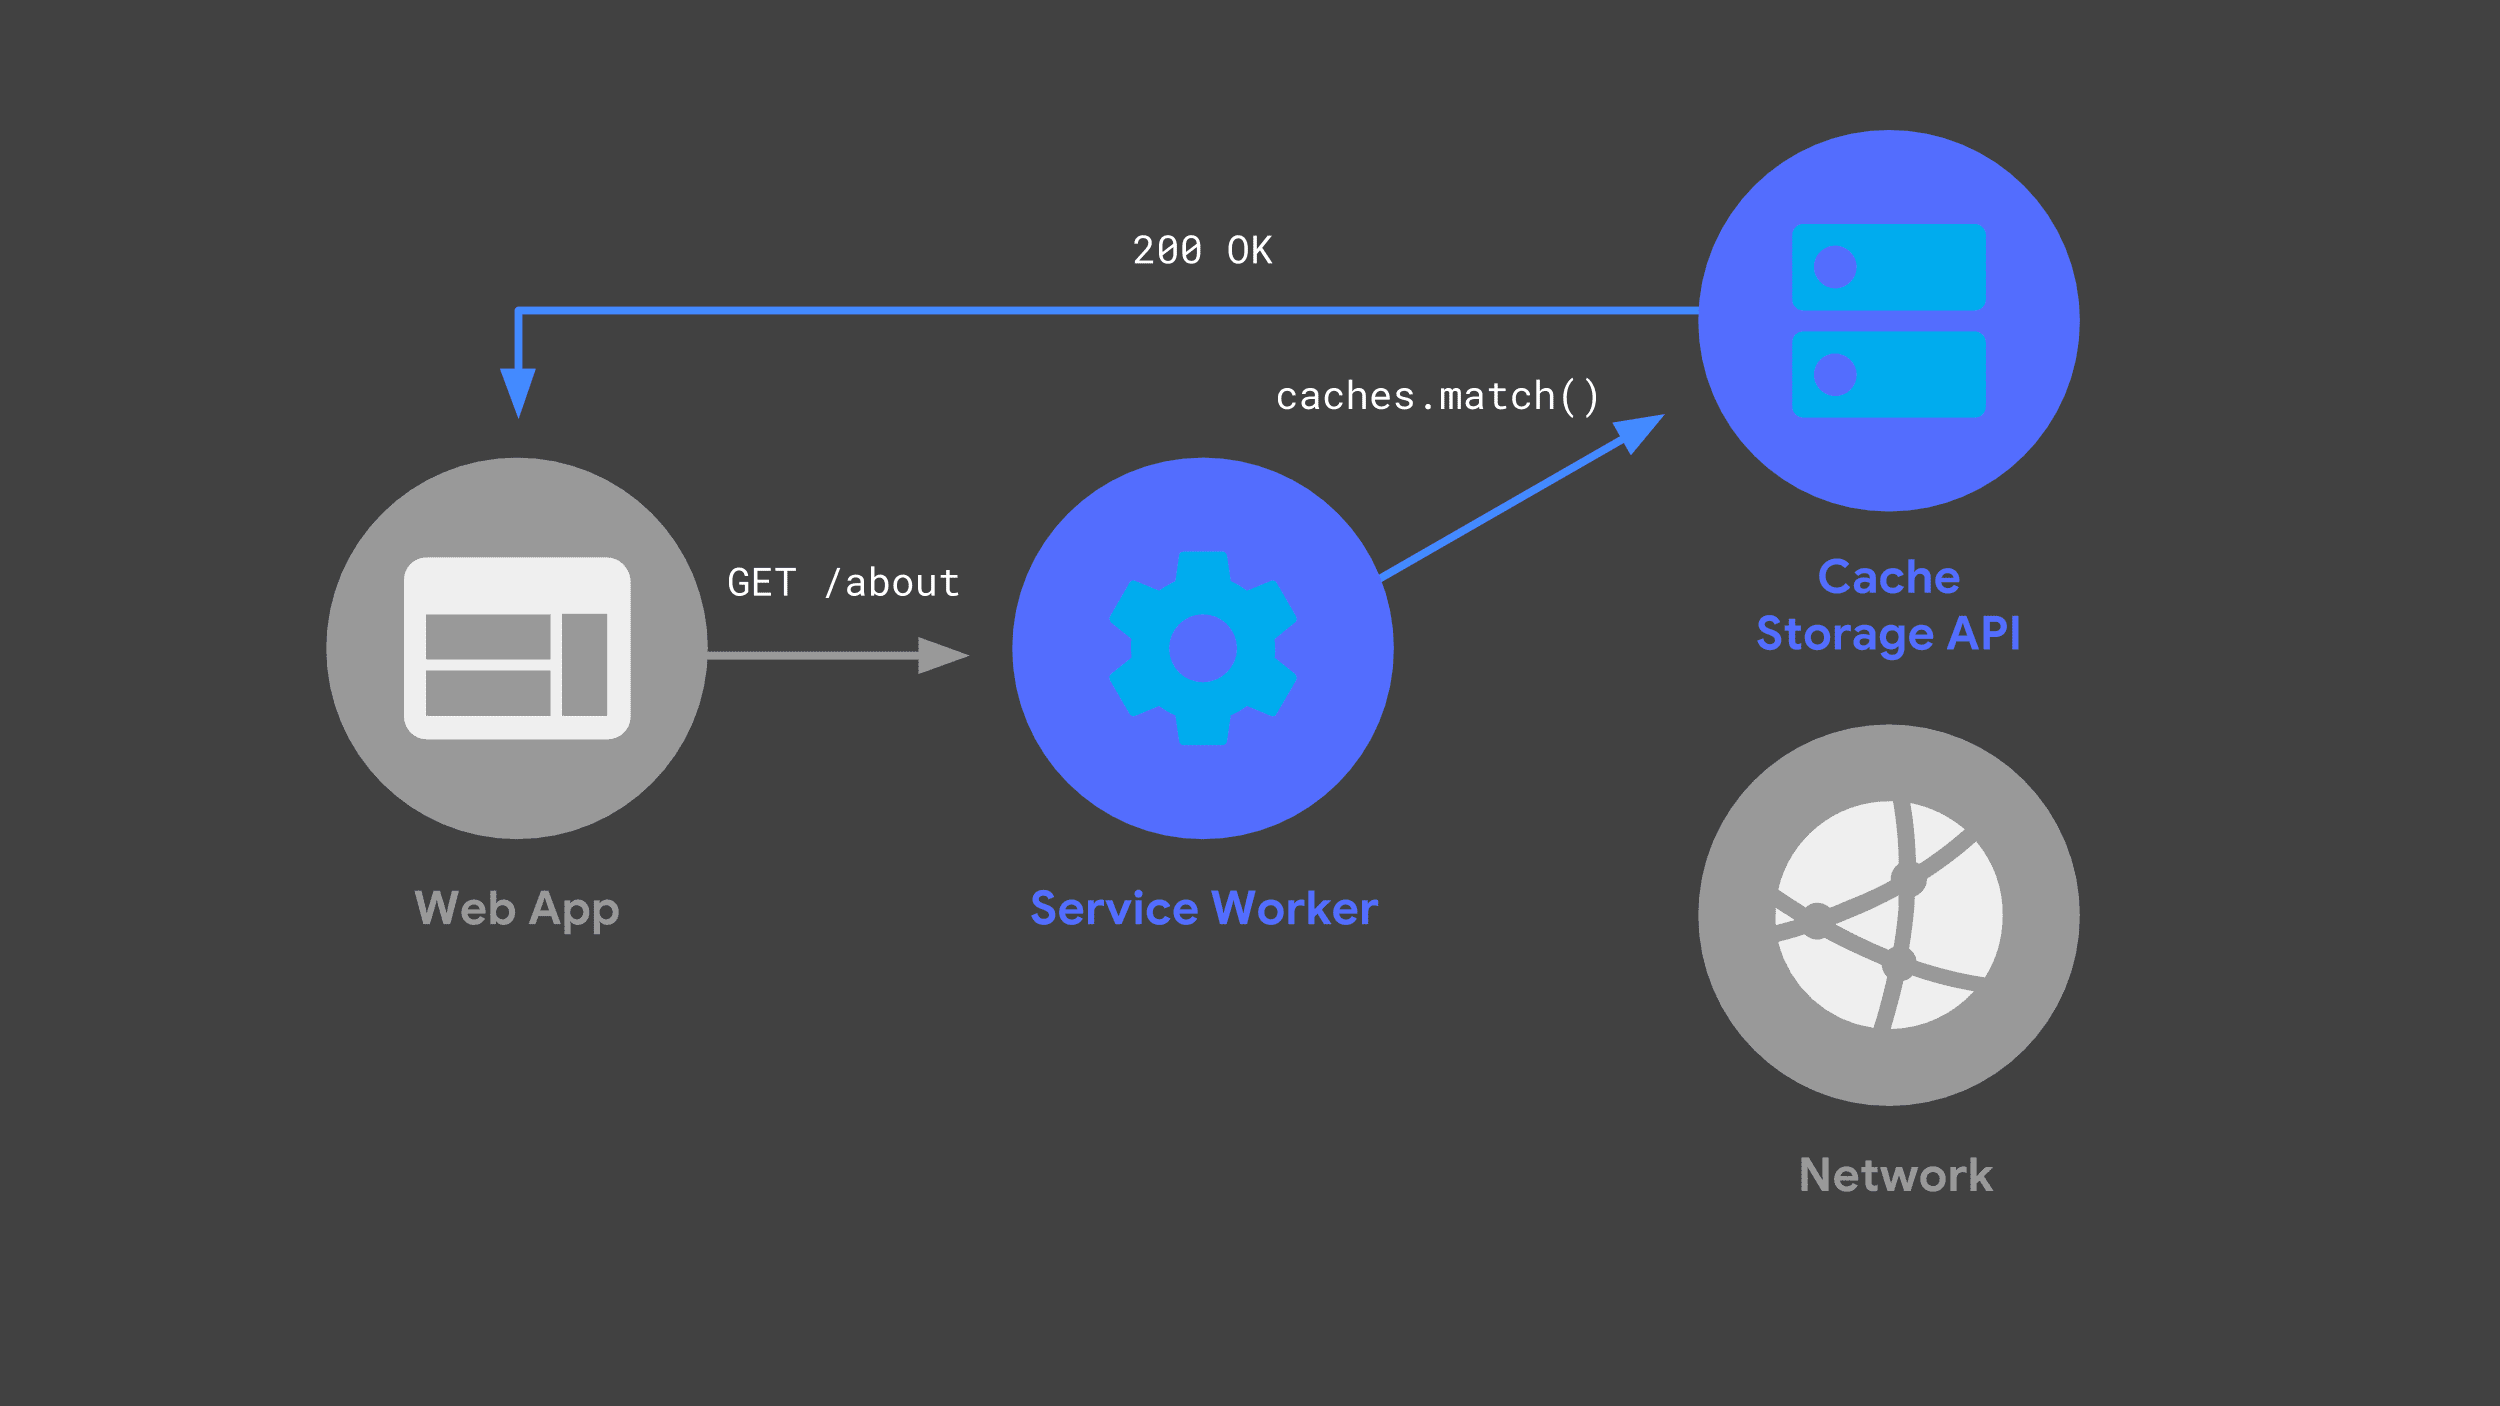 A service worker using the Cache Storage API to respond, bypassing the network.